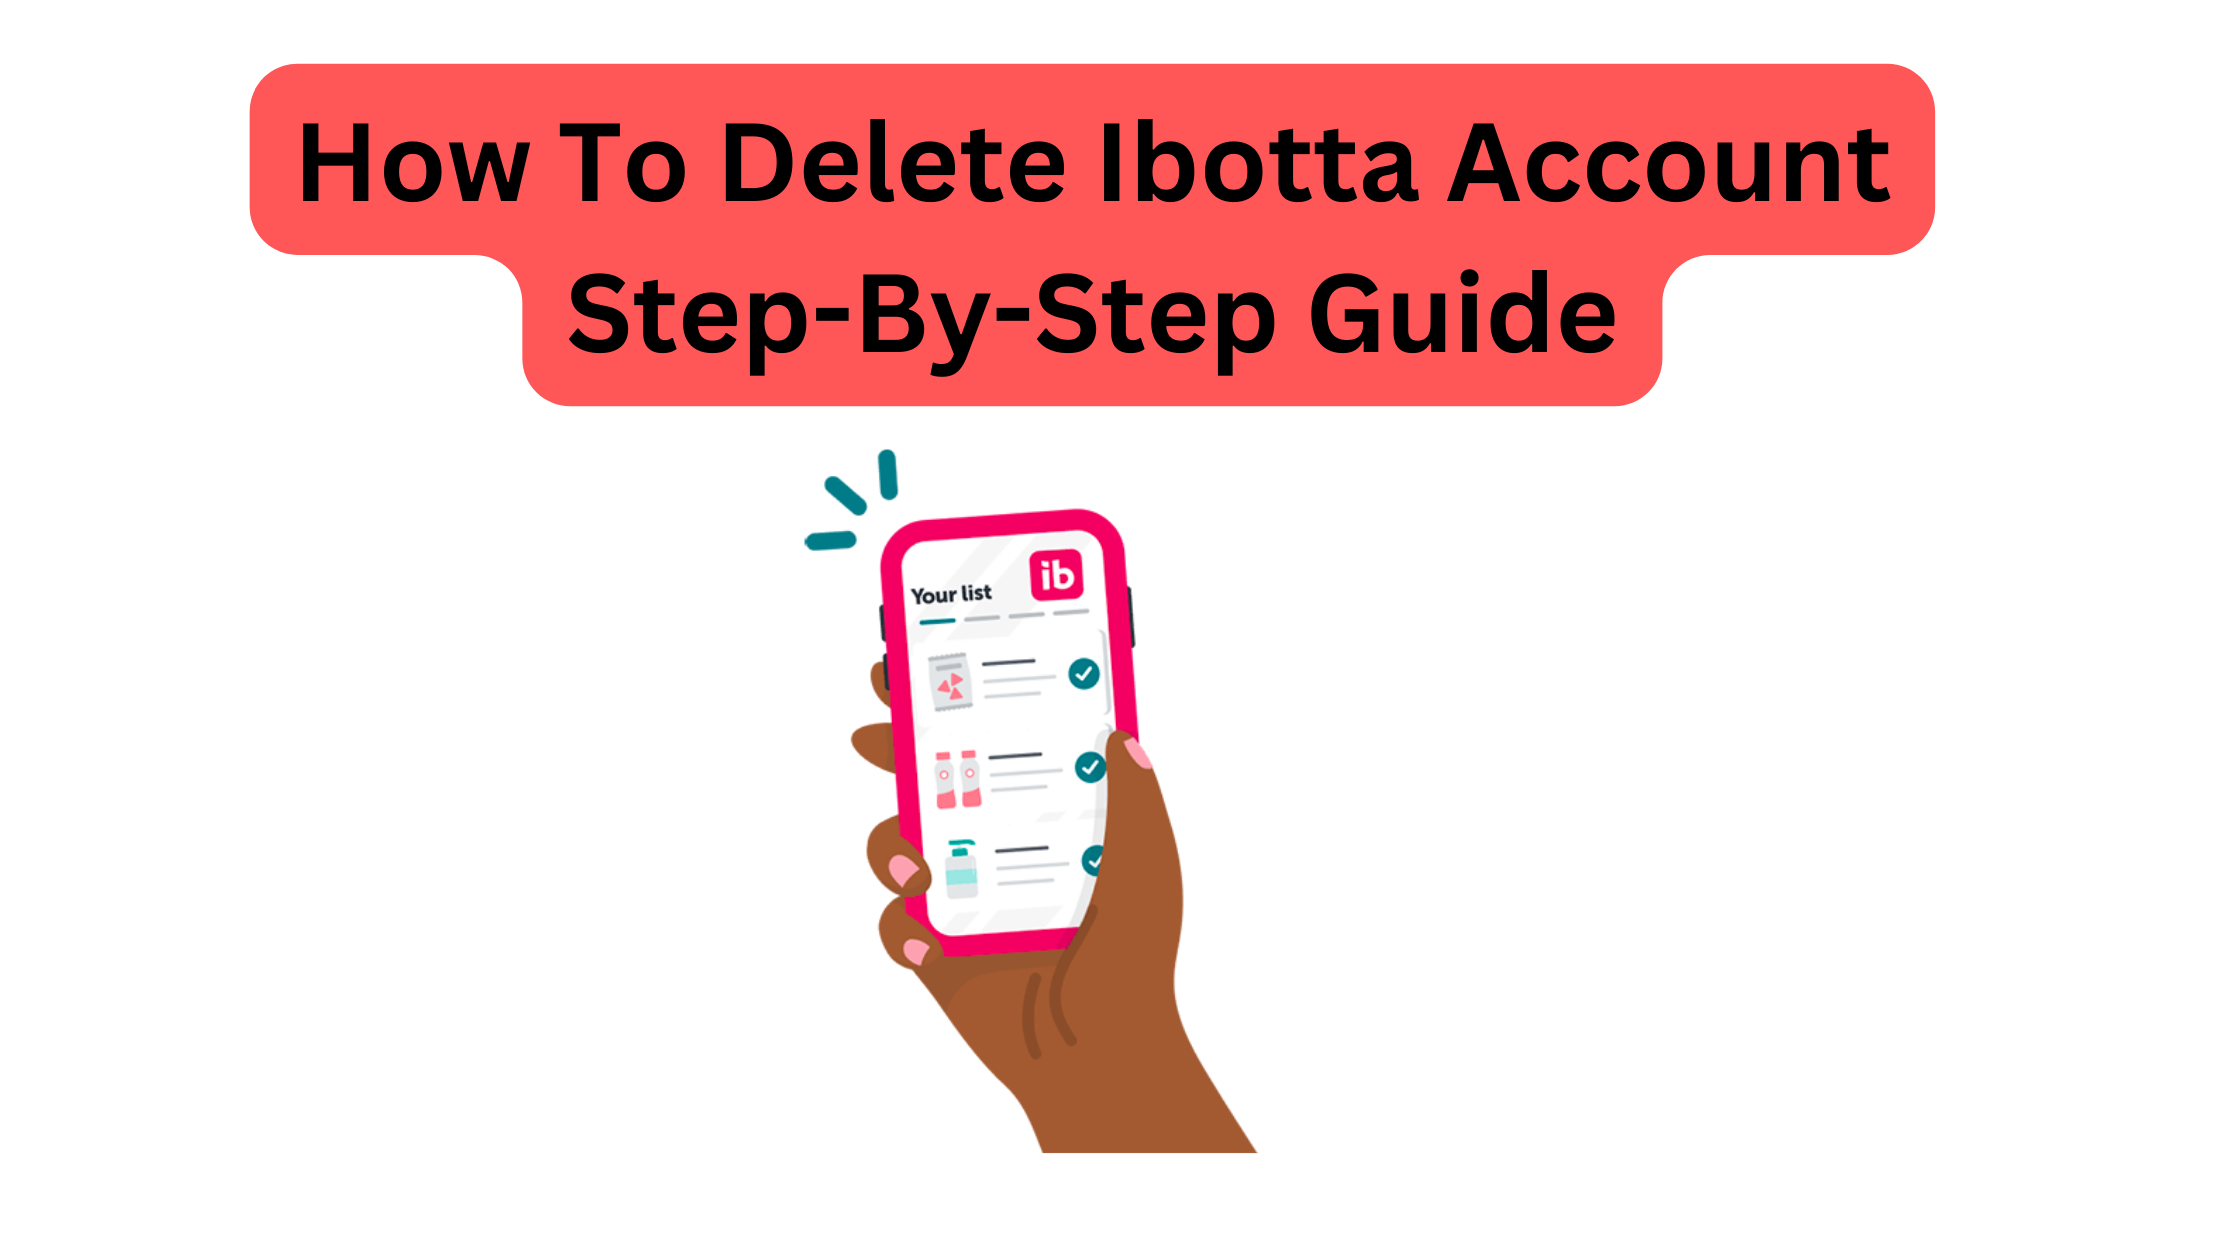 How To Delete Ibotta Account - Step-By-Step Guide